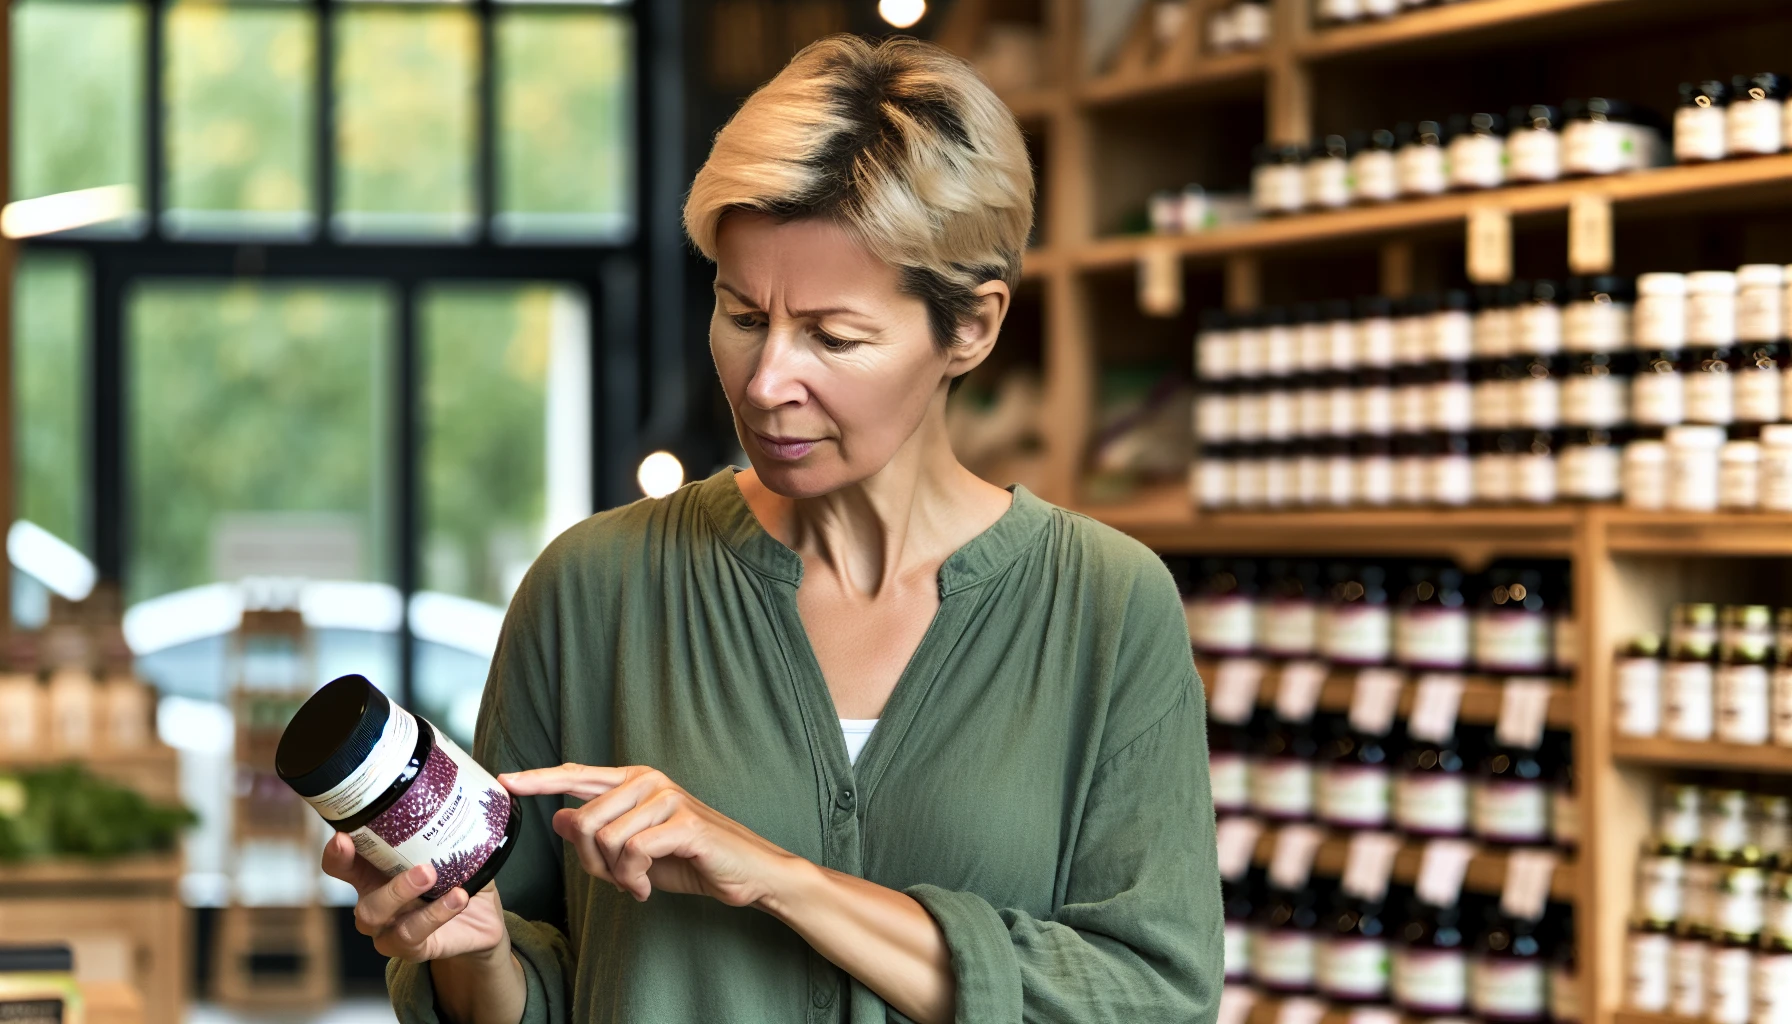 Woman reading label of elderberry product